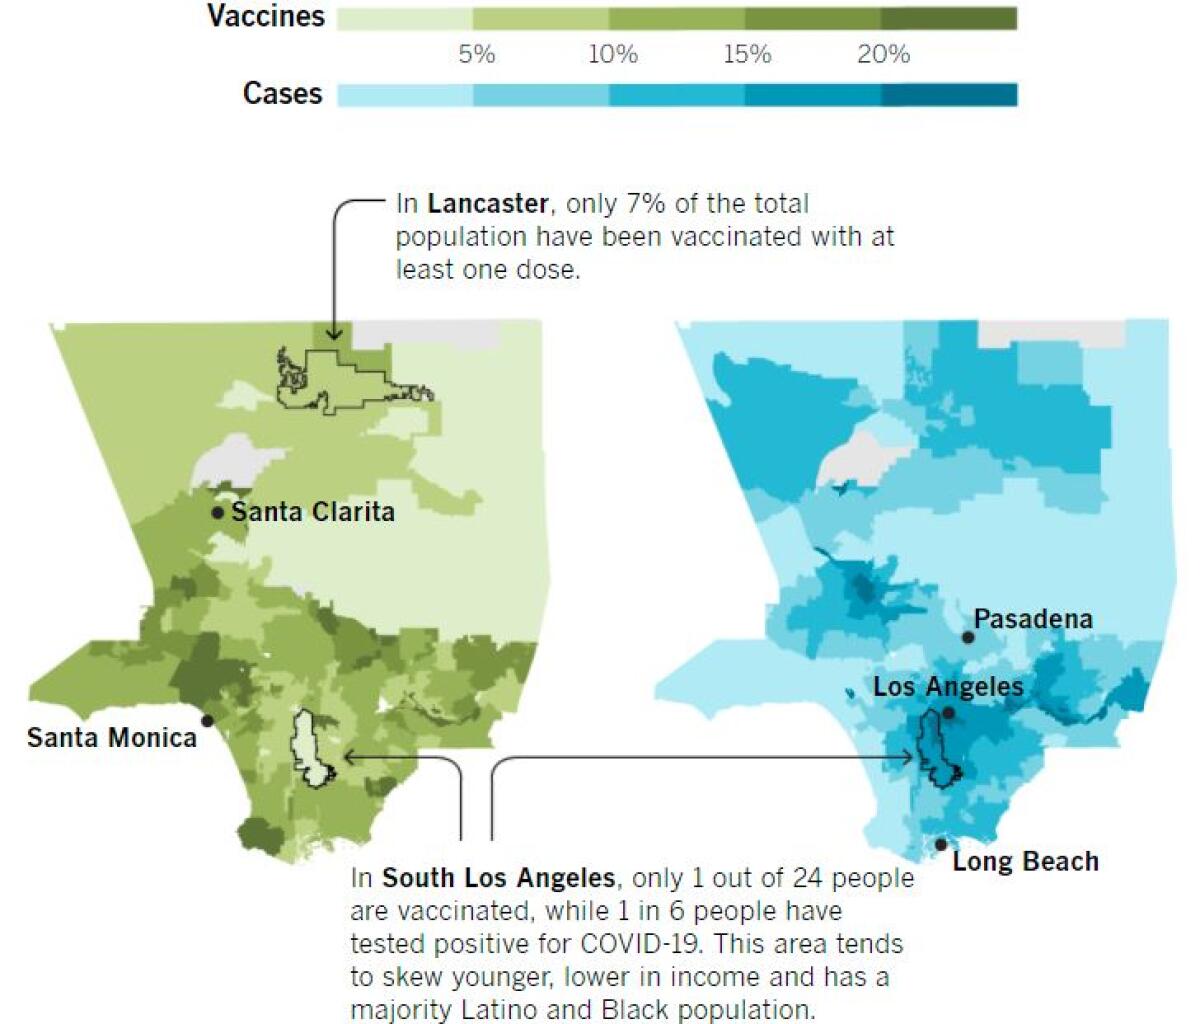 Maps of L.A. County case and vaccination rates. In South L.A., only 1 in 24 people is vaccinated; 1 in 6 has tested positive.